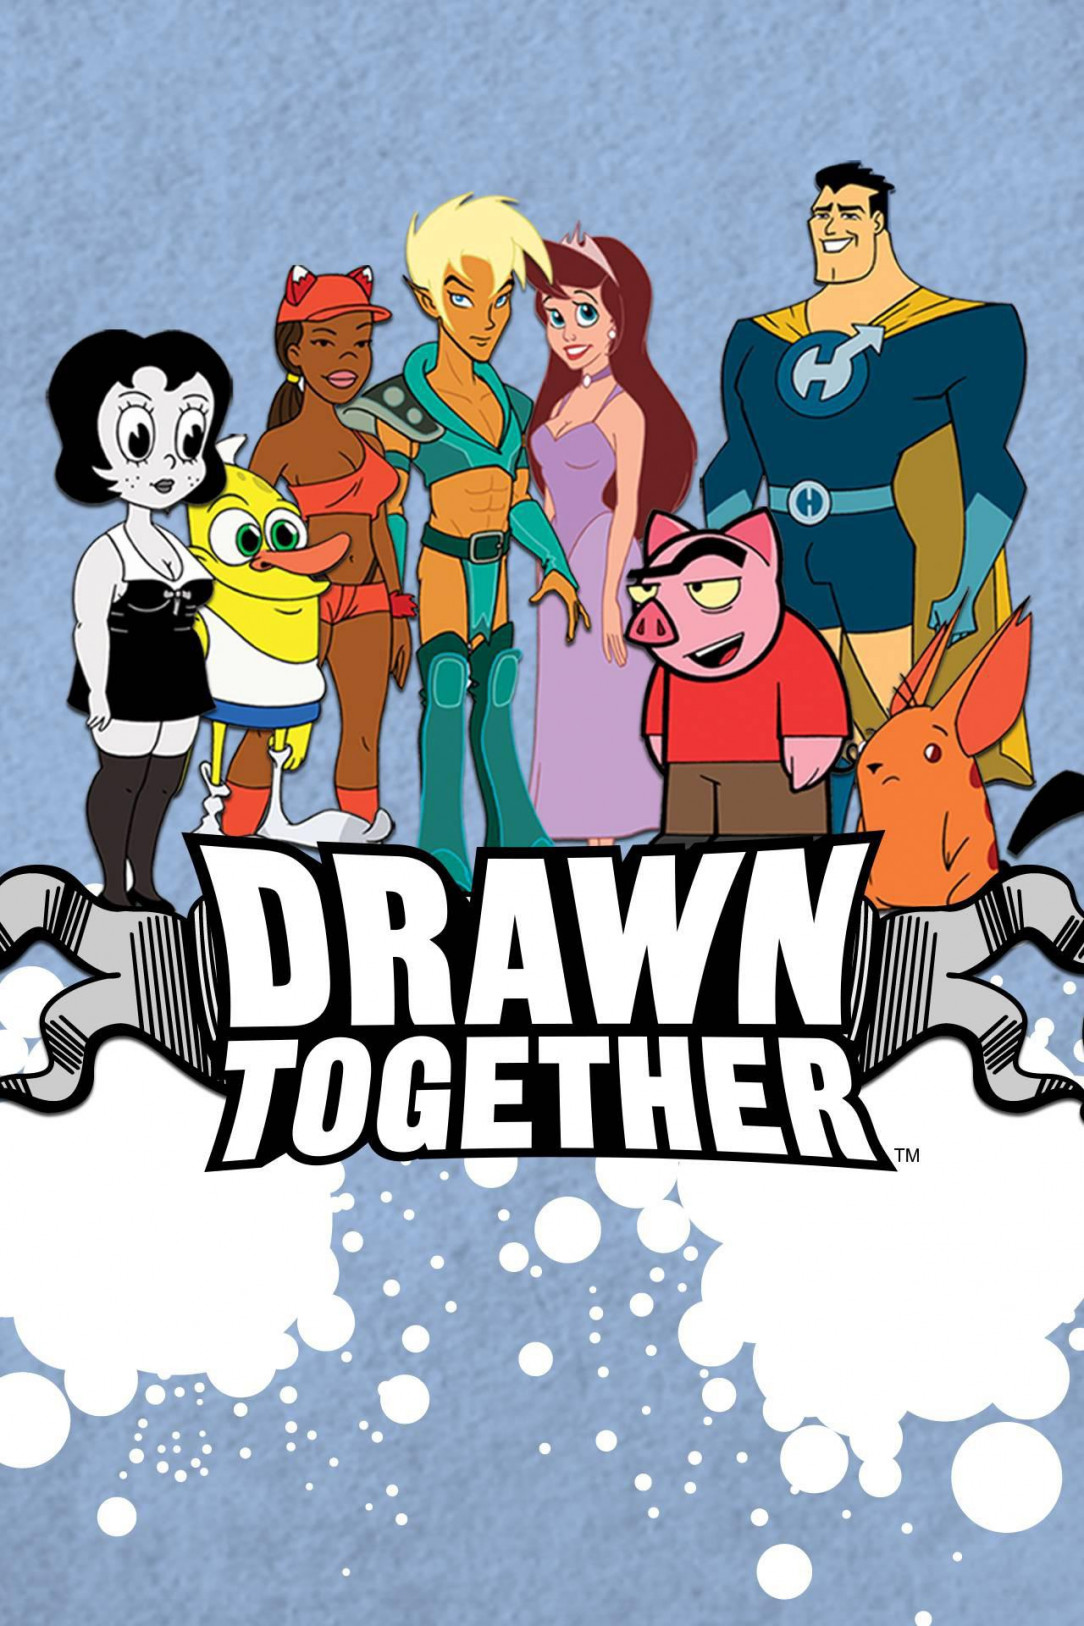 Drawn Together (2004, Comedy Central)